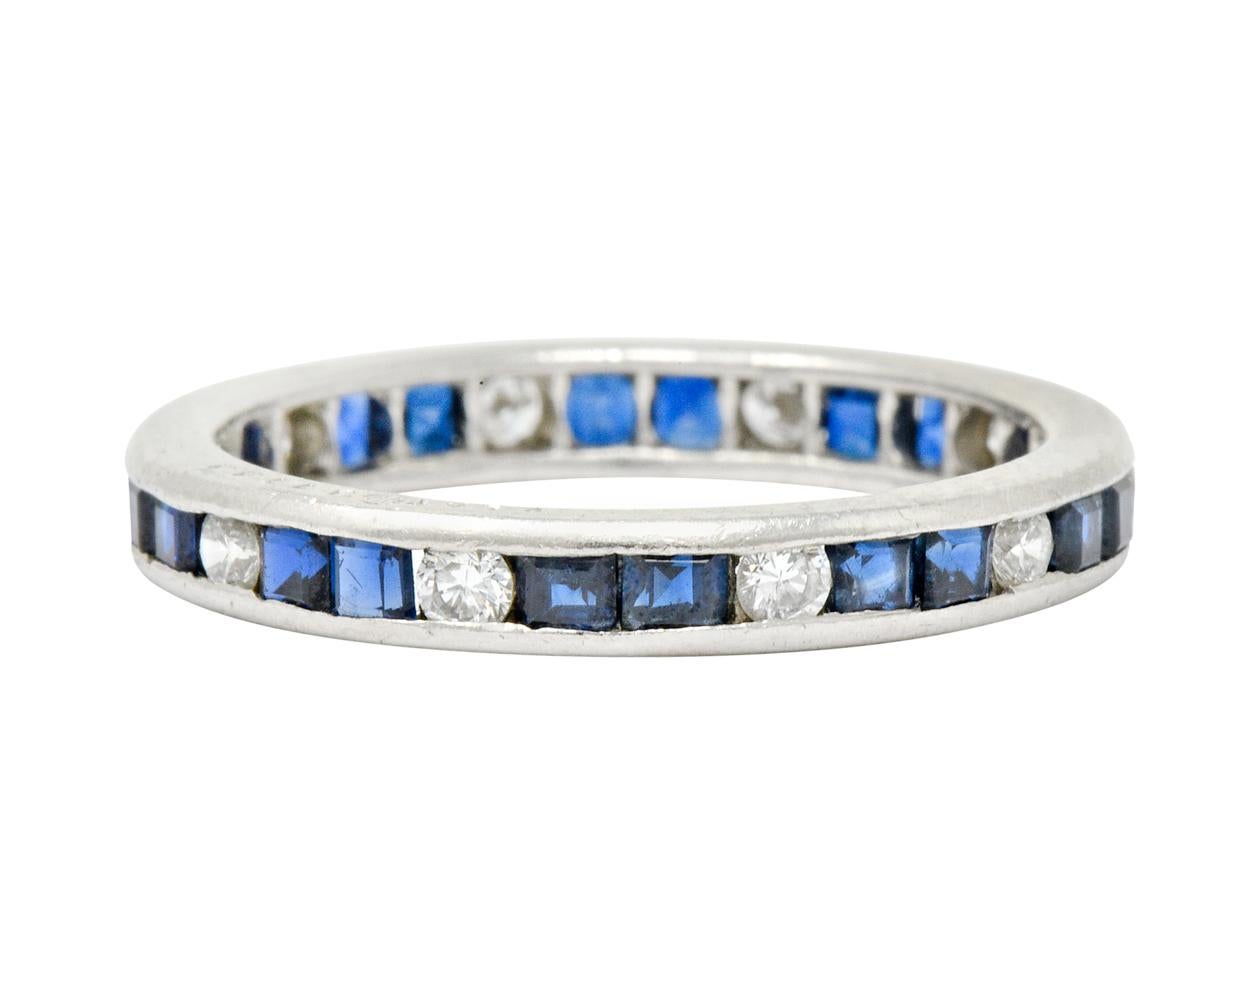 Eternity style band ring channel set fully around by square cut sapphire and round brilliant cut diamonds - alternating

Diamonds weigh in total approximately 0.30 carat - G/H color with SI clarity

Sapphires weigh in total approximately 0.80 carat